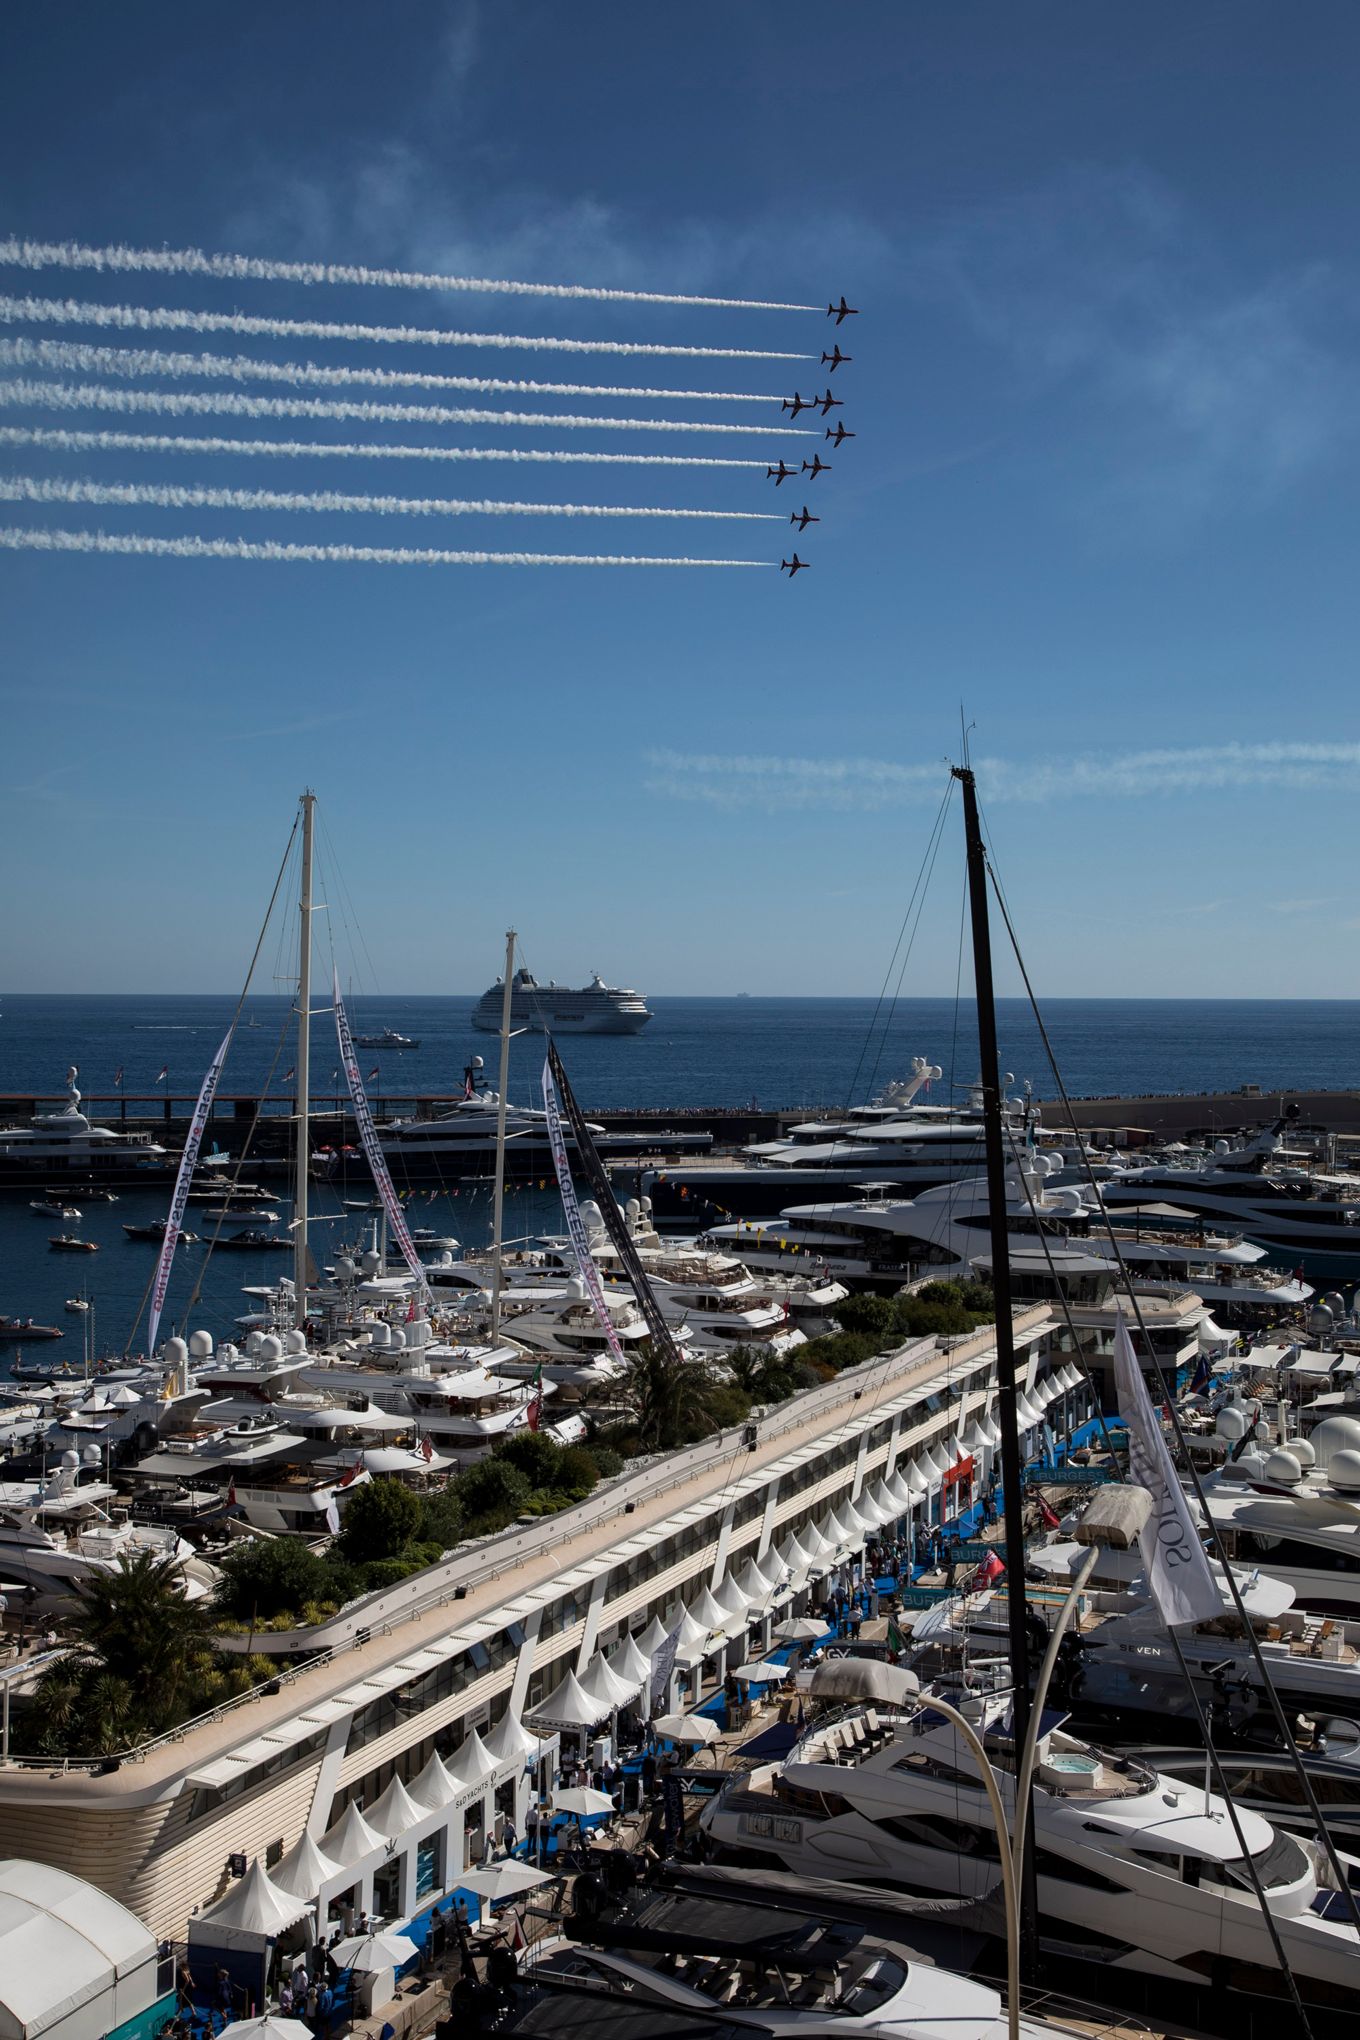 Monaco was the venue for the final 2018 display.